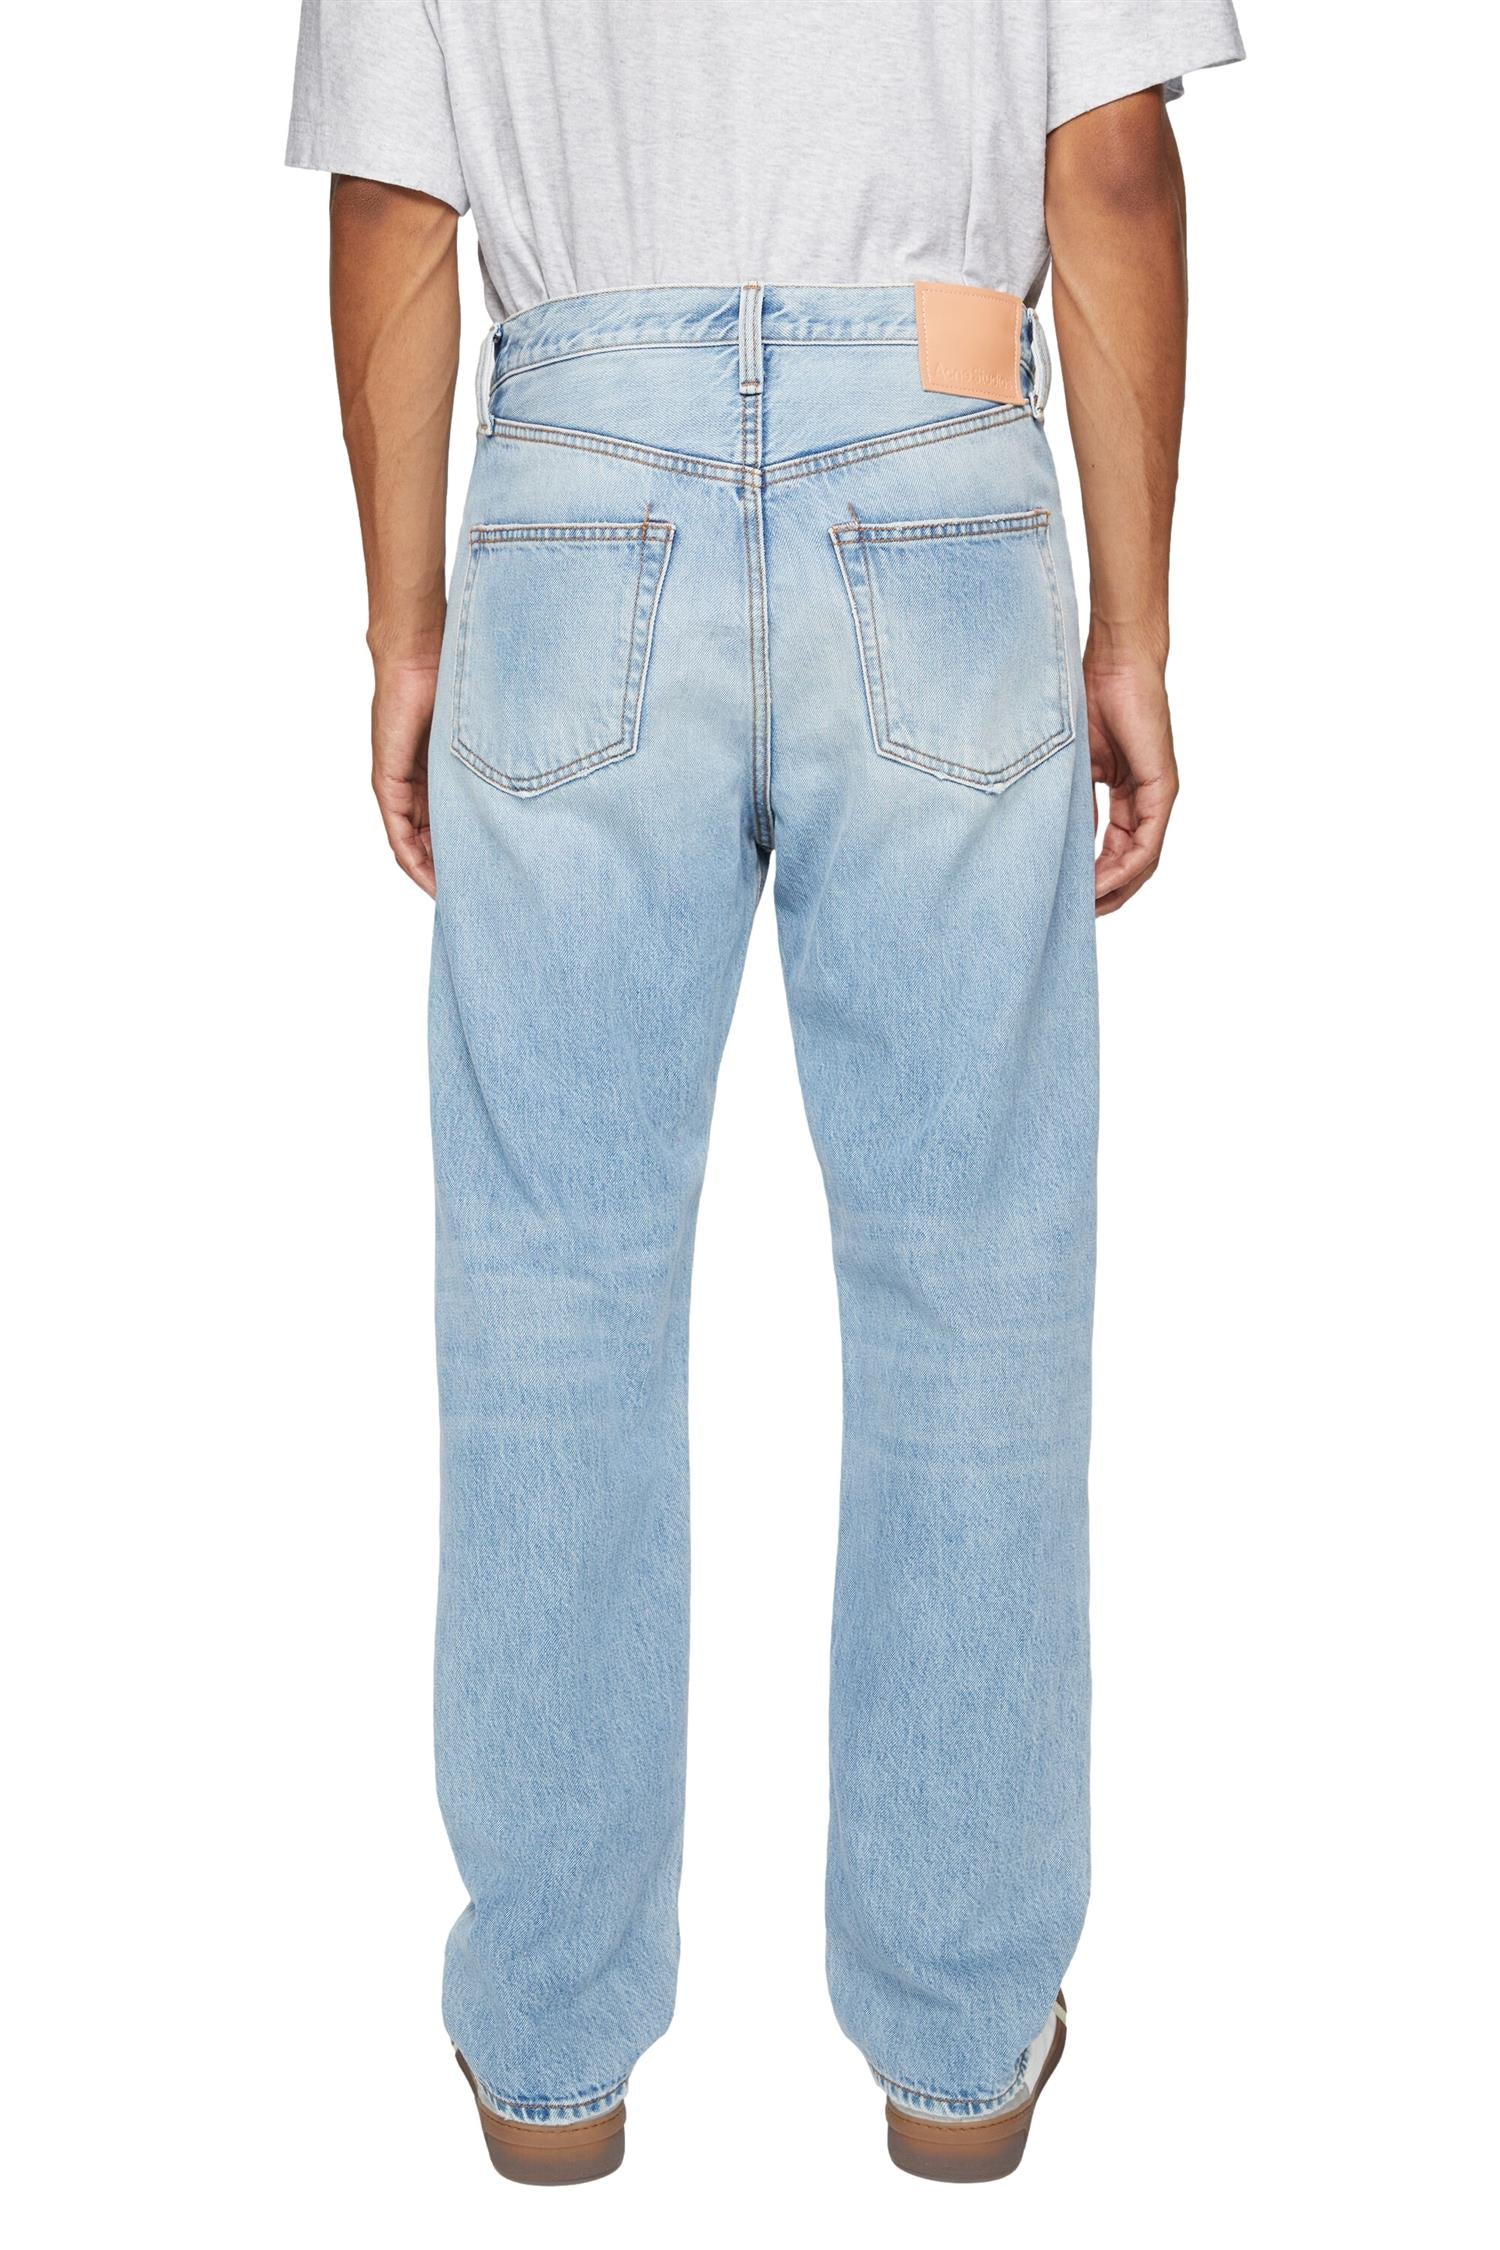 Acne Relaxed Fit Jeans - 2003 Jeans Denim - [modostore.no]